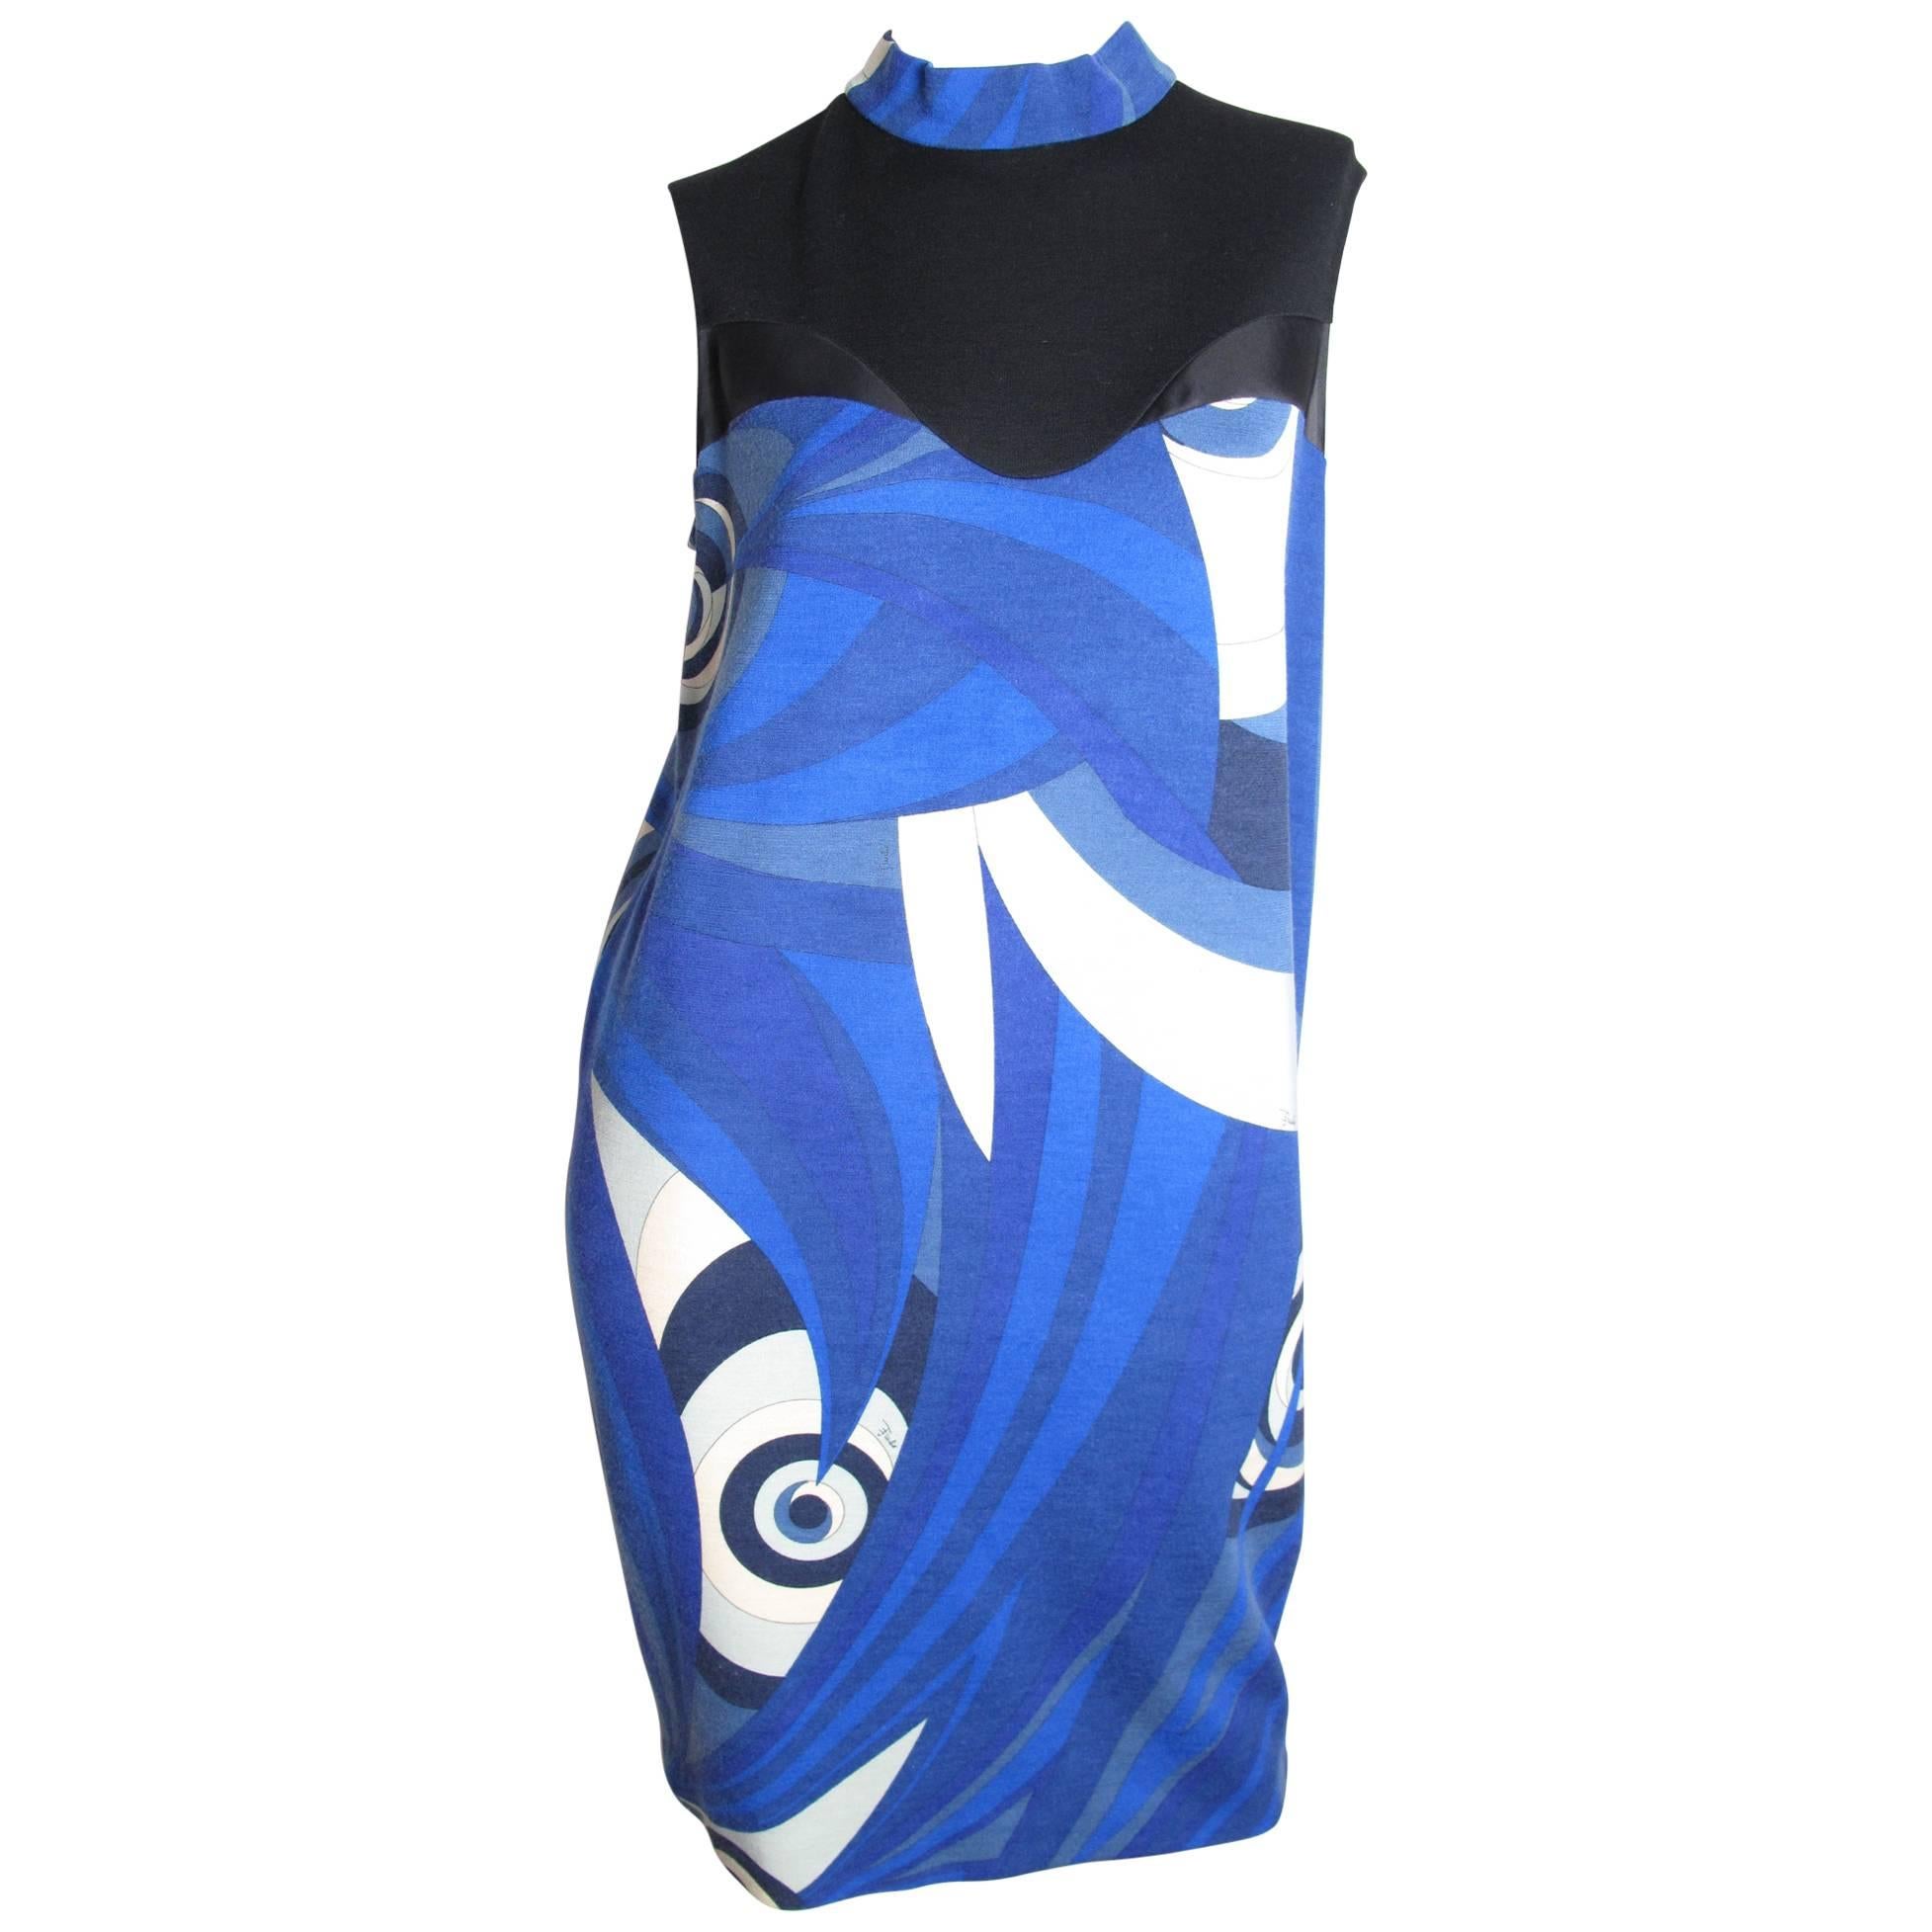 Emilio Pucci Blue Geometric Printed Dress with Sheer Panels 